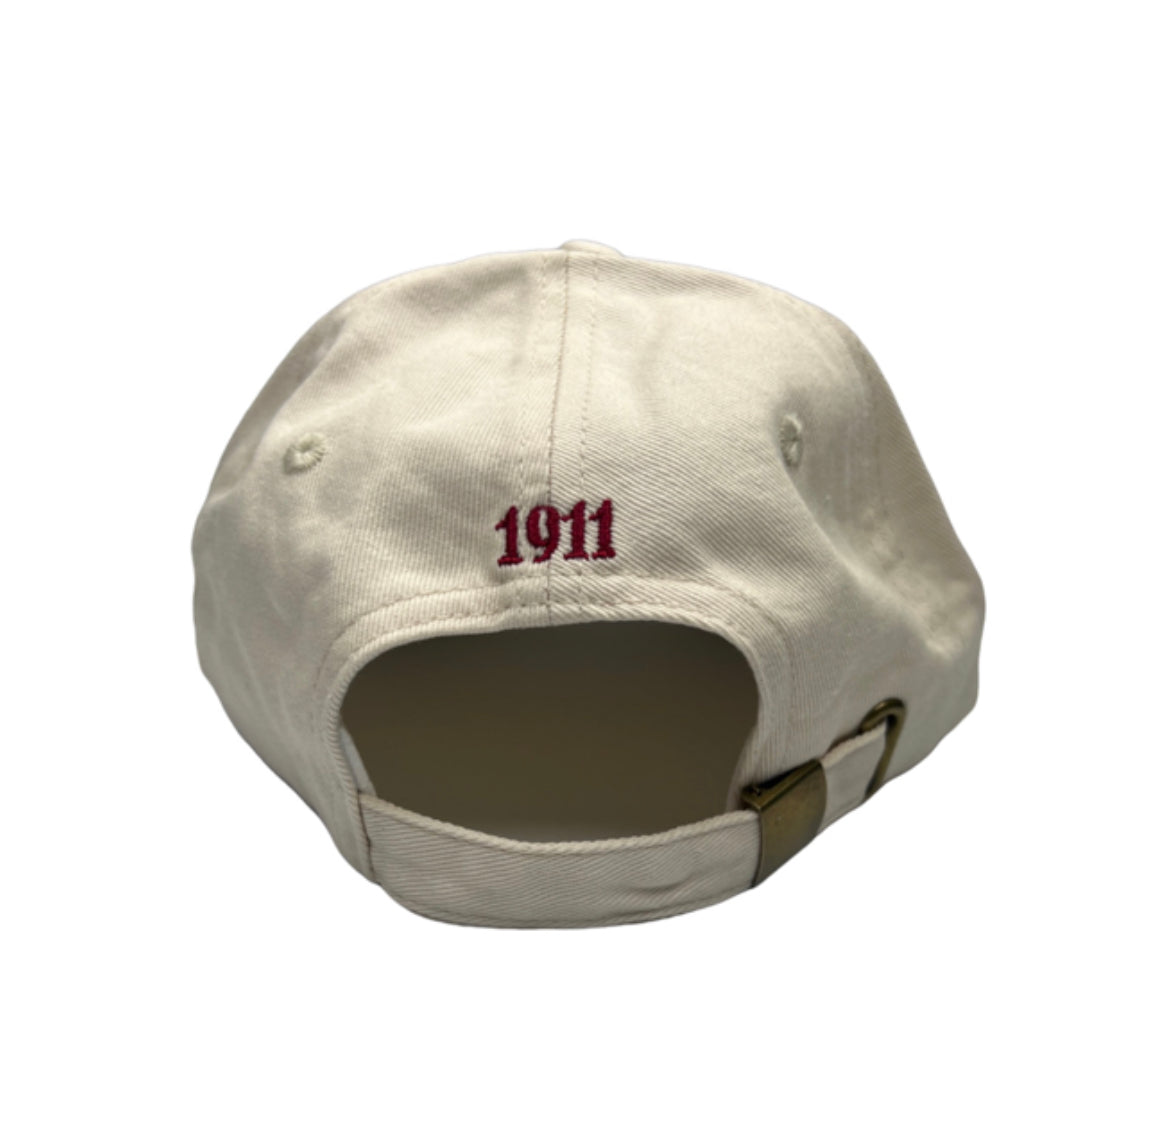 Show your pride for Kappa Alpha Psi with this cream baseball hat. Perfect for any occasion, this hat is a must-have for any Fraternity member. Represent your organization with style and class. The cream color adds a touch of sophistication while the Kappa Alpha Psi logo boldly stands out on the front of the hat. Wear it to social events, on campus, or out with friends. This hat is a great addition to any collection and makes a perfect gift for fellow members.